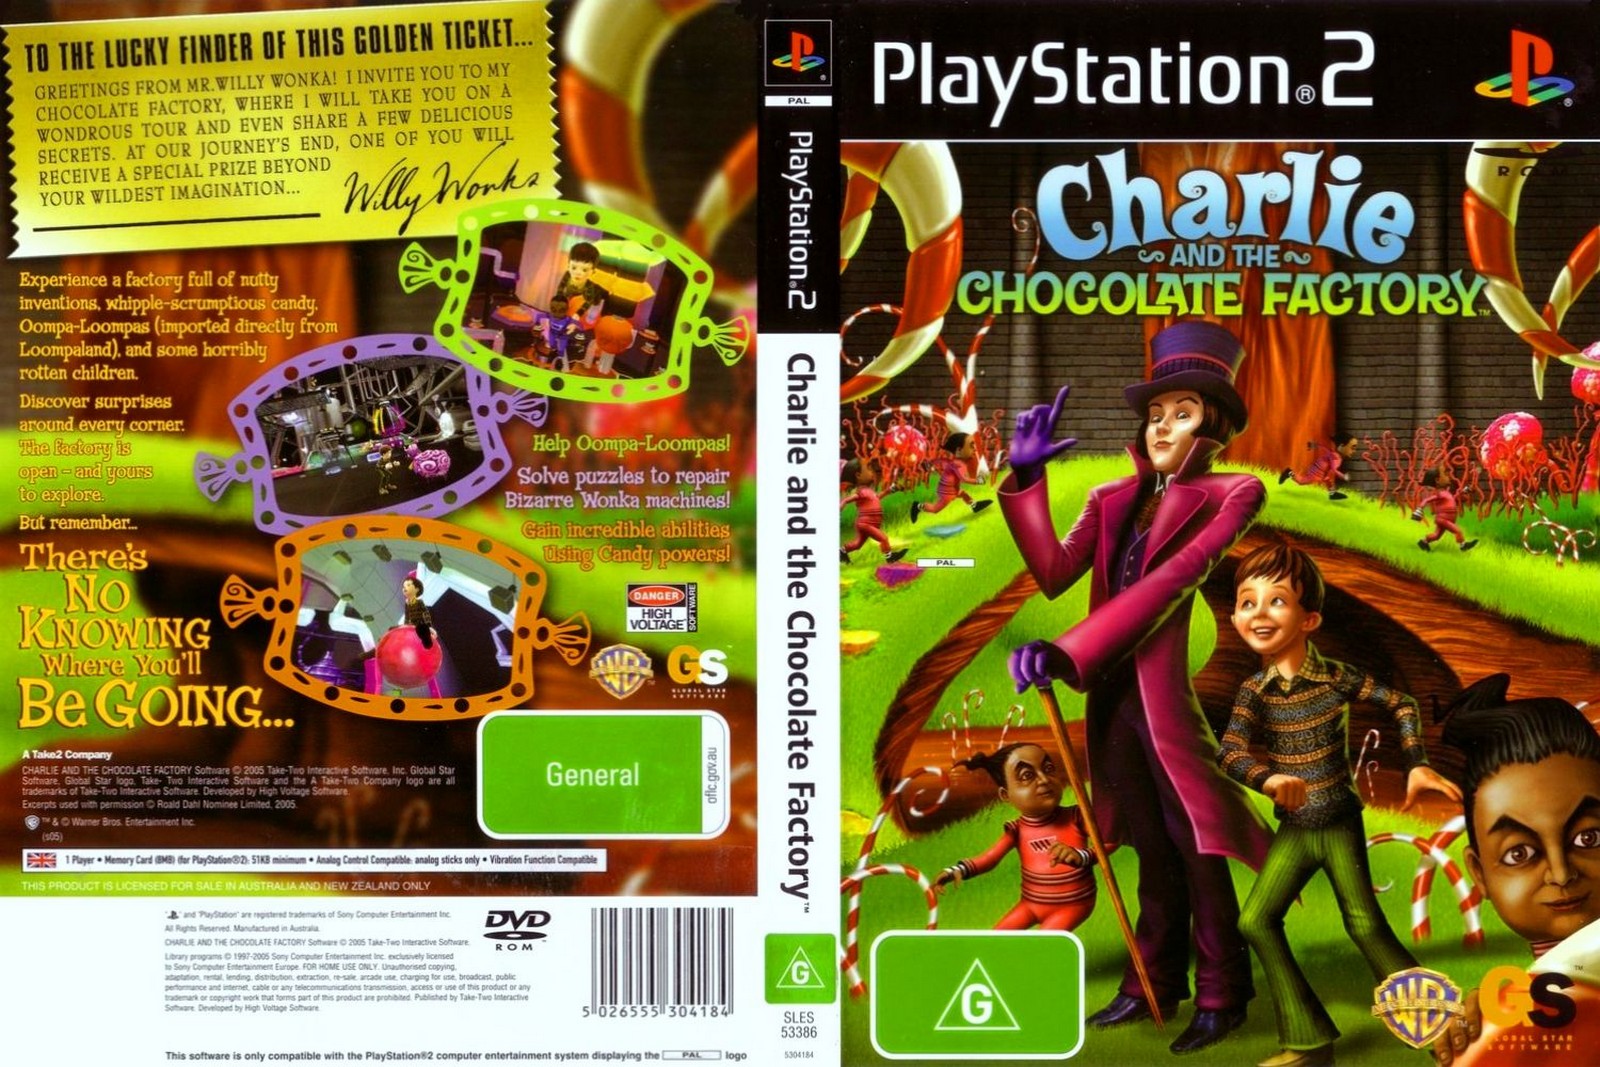 Charlie+and+the+Chocolate+Factory+PS2.jpg